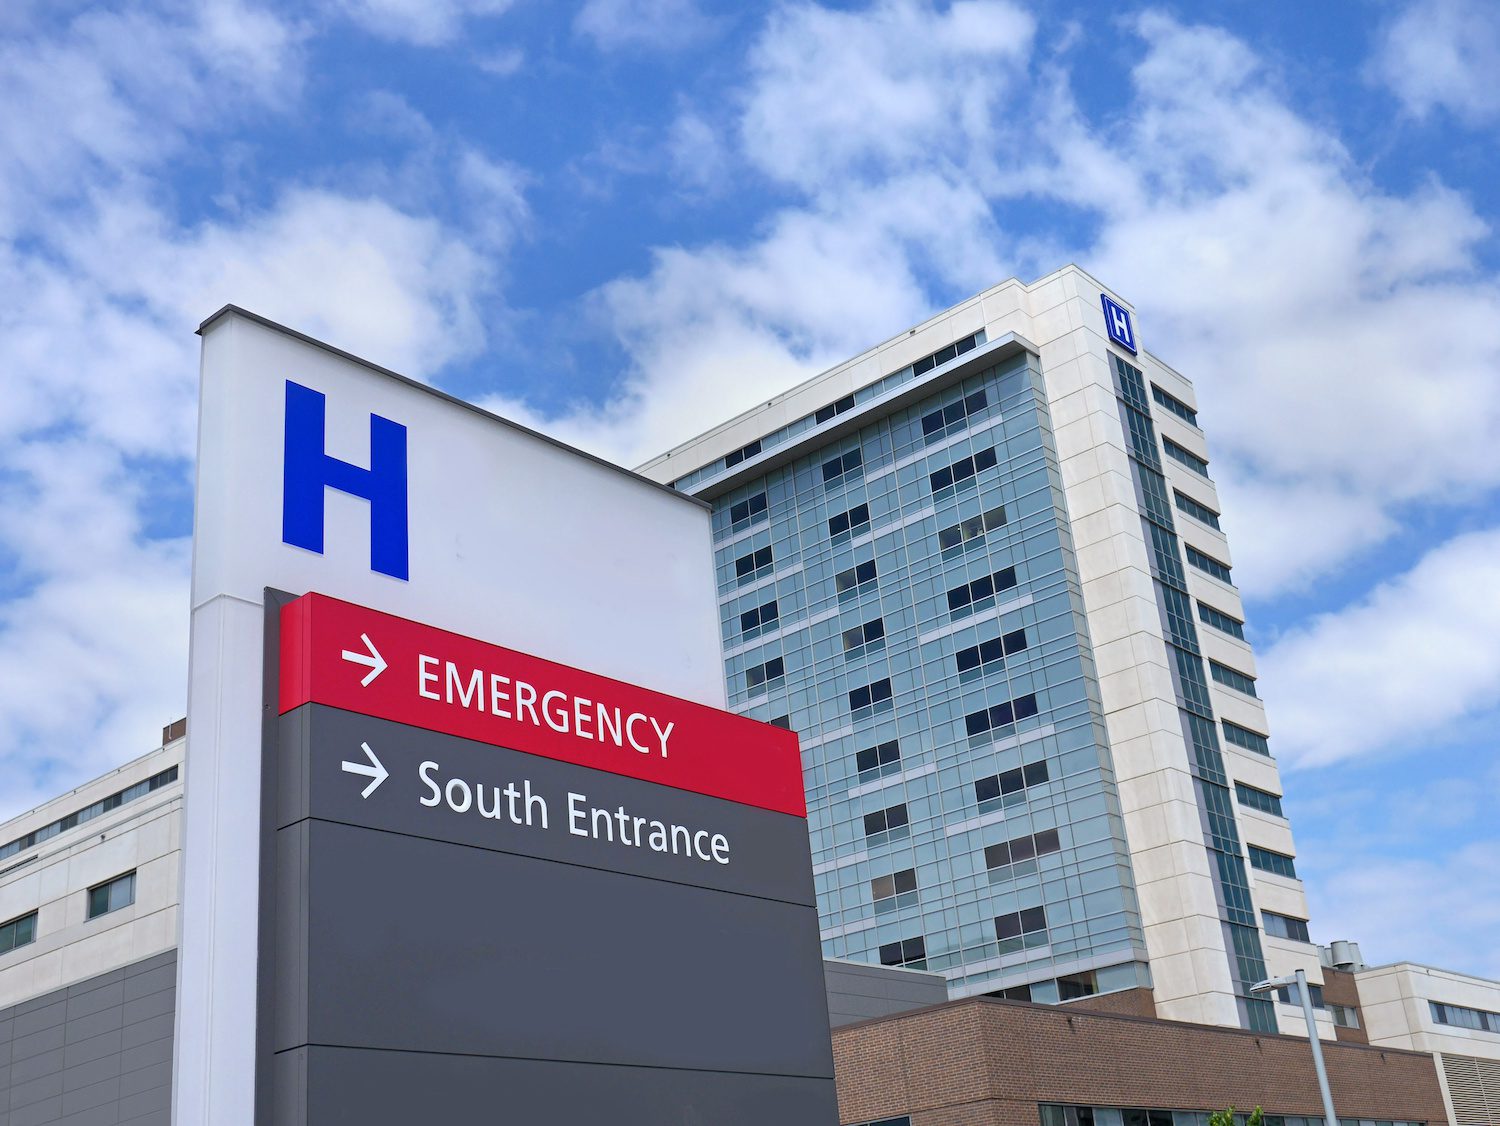 Hospital sign with emergency entrance